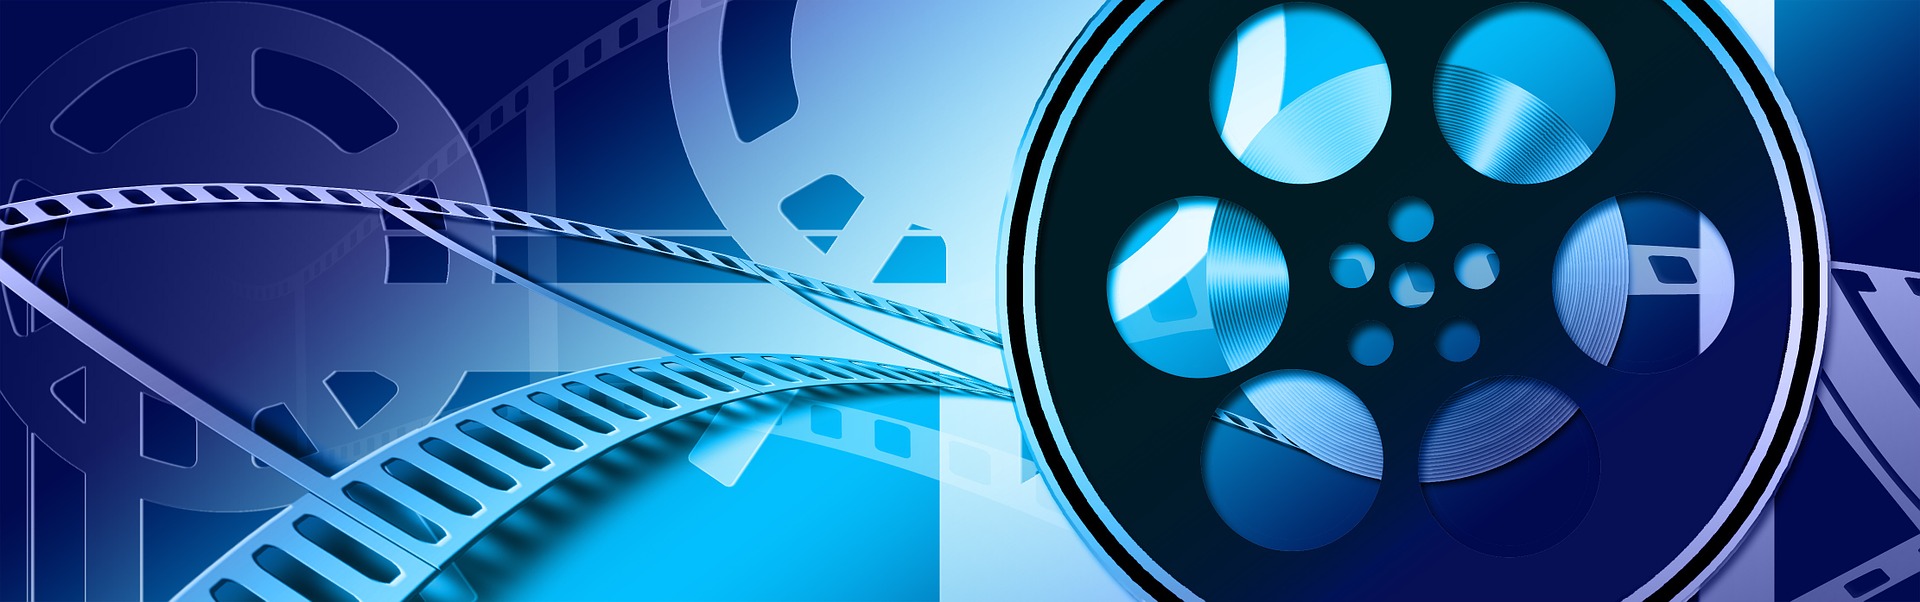 4 Great Movies that Provide Inspiration for Business Leaders